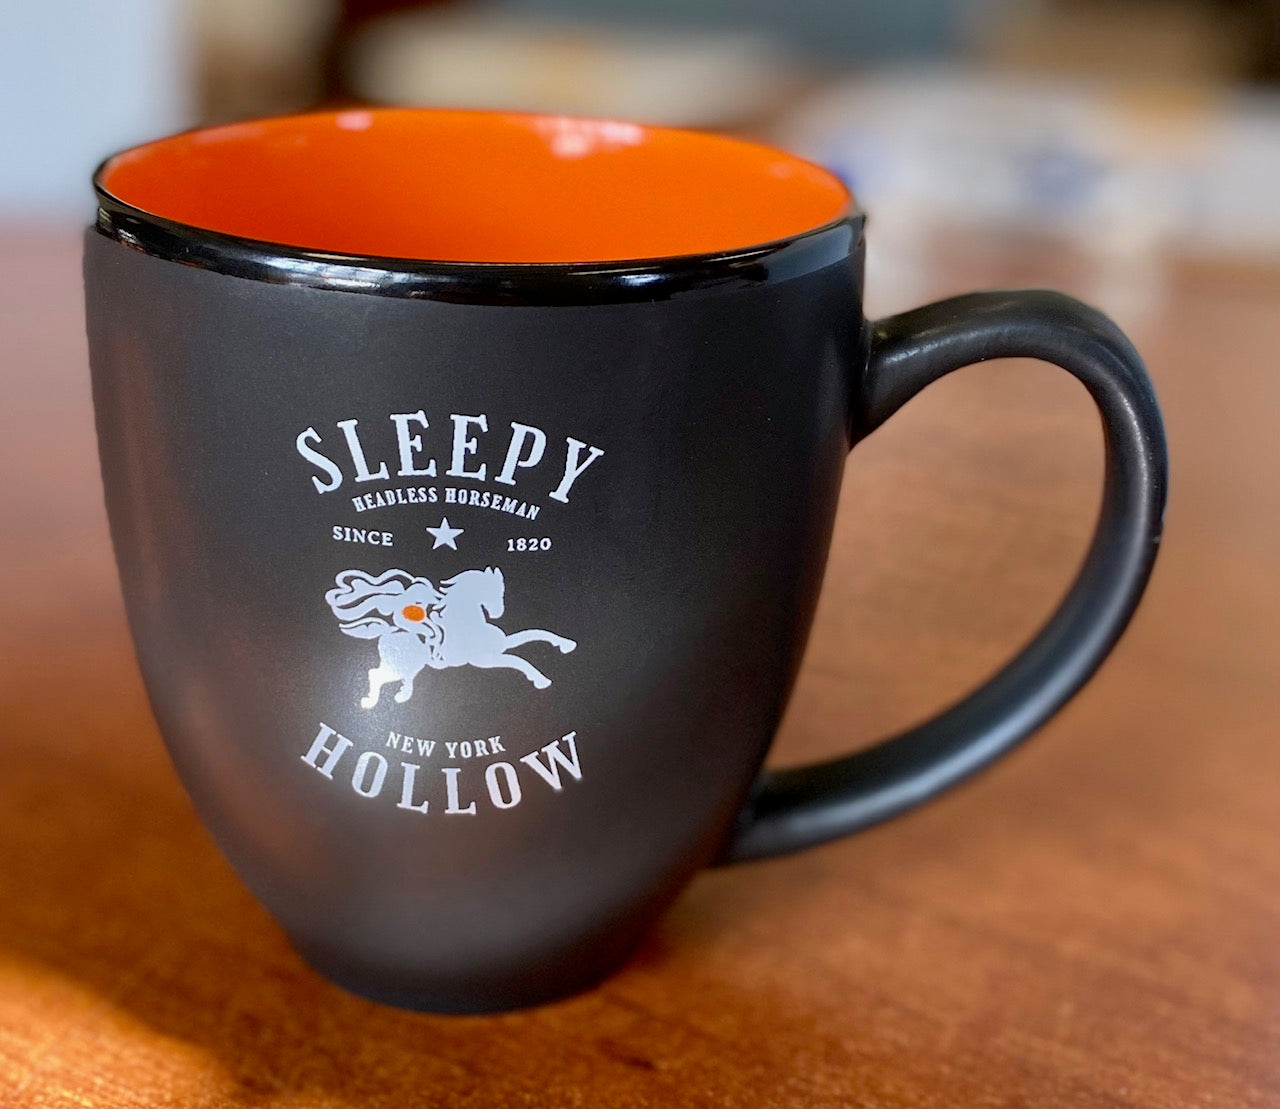 Our matte black bistro mug features the Headless Horseman and his hometown of Sleepy Hollow, New York.